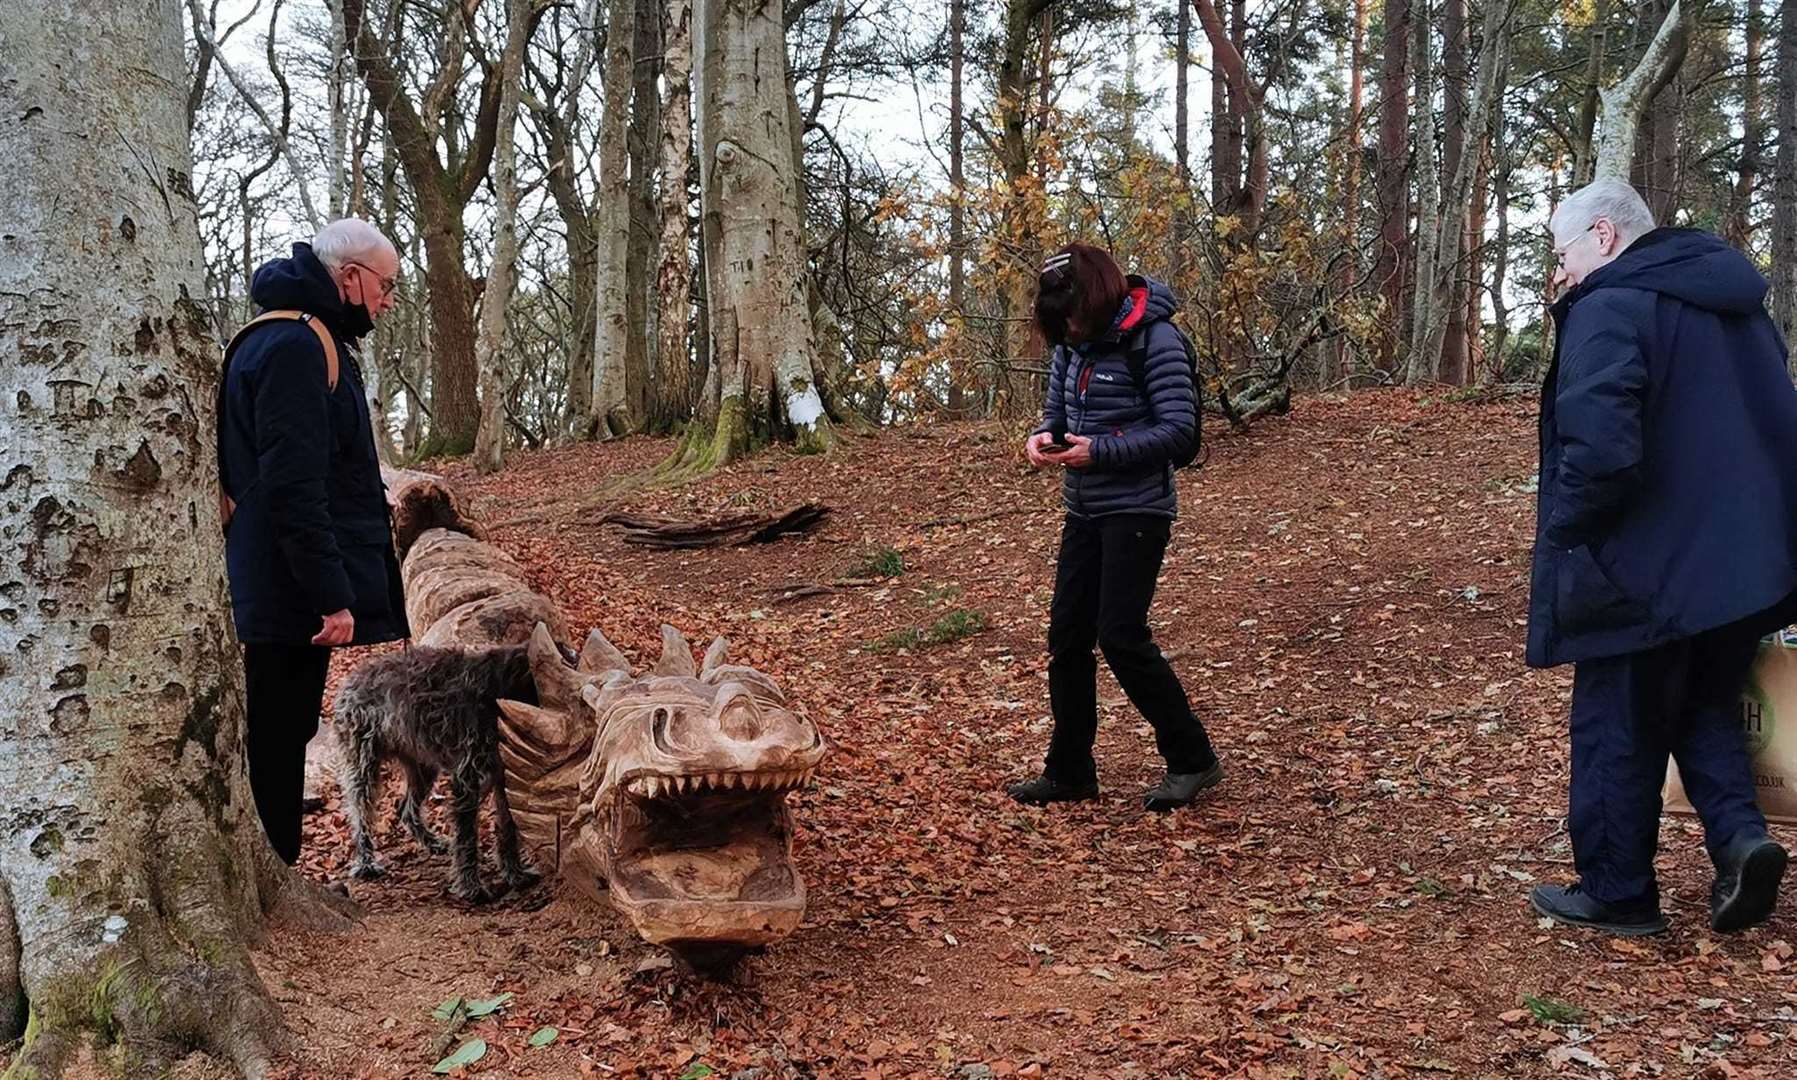 Checking out Smokey the dragon on a walk through Cluny Hill.